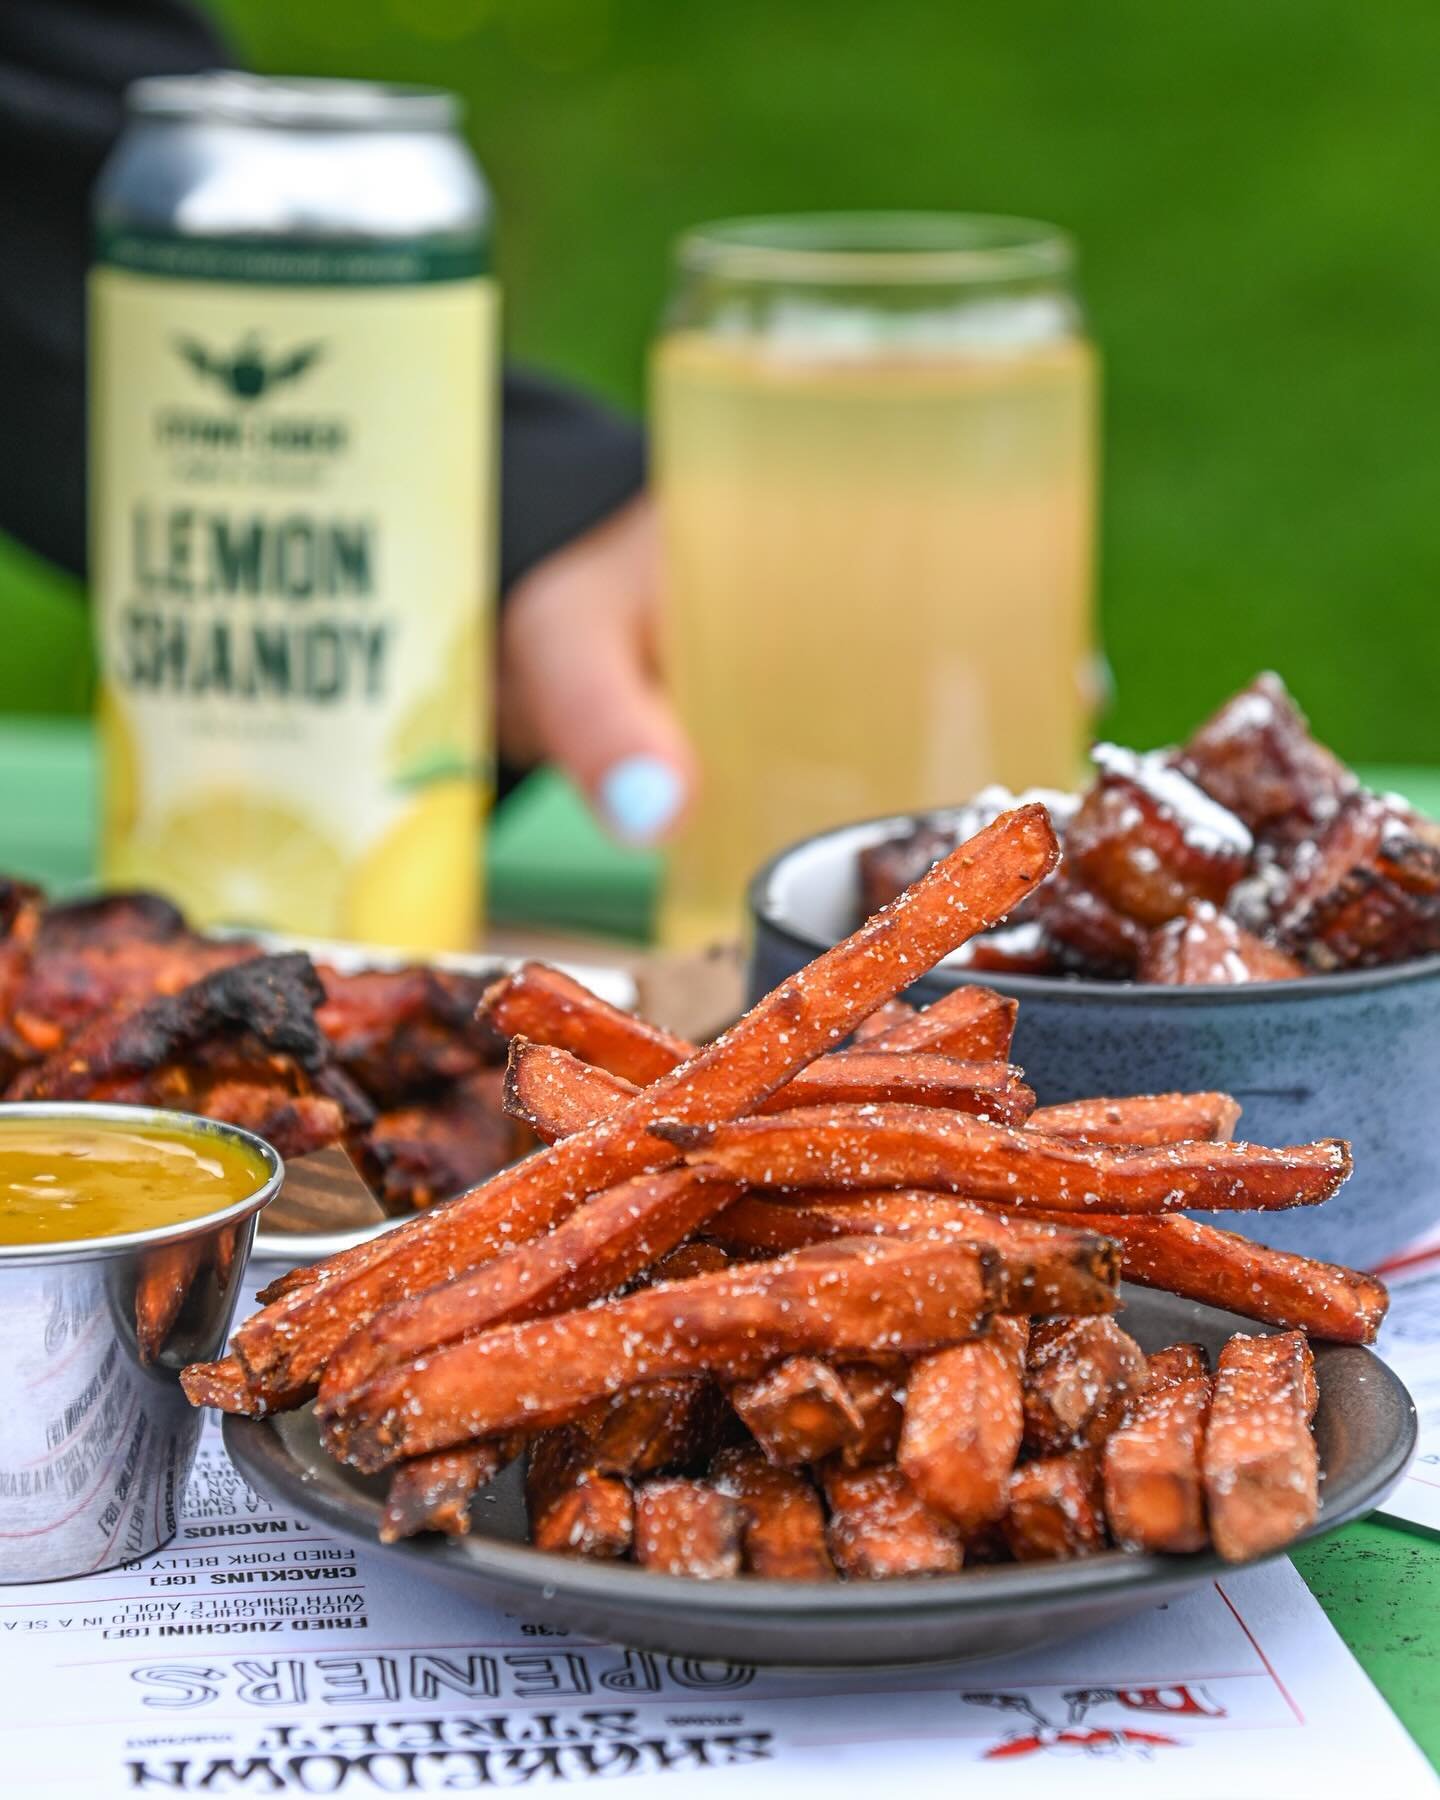 Lemon Shandy &amp; sweet potato fries?! Yum is an understatement ☀️☀️

Did you know we have a full bar &amp; dining menu at our taproom in Stowe? We offer delicious smoked BBQ, sandwiches, salads, specialty cocktails &amp; more.

Follow our restauran